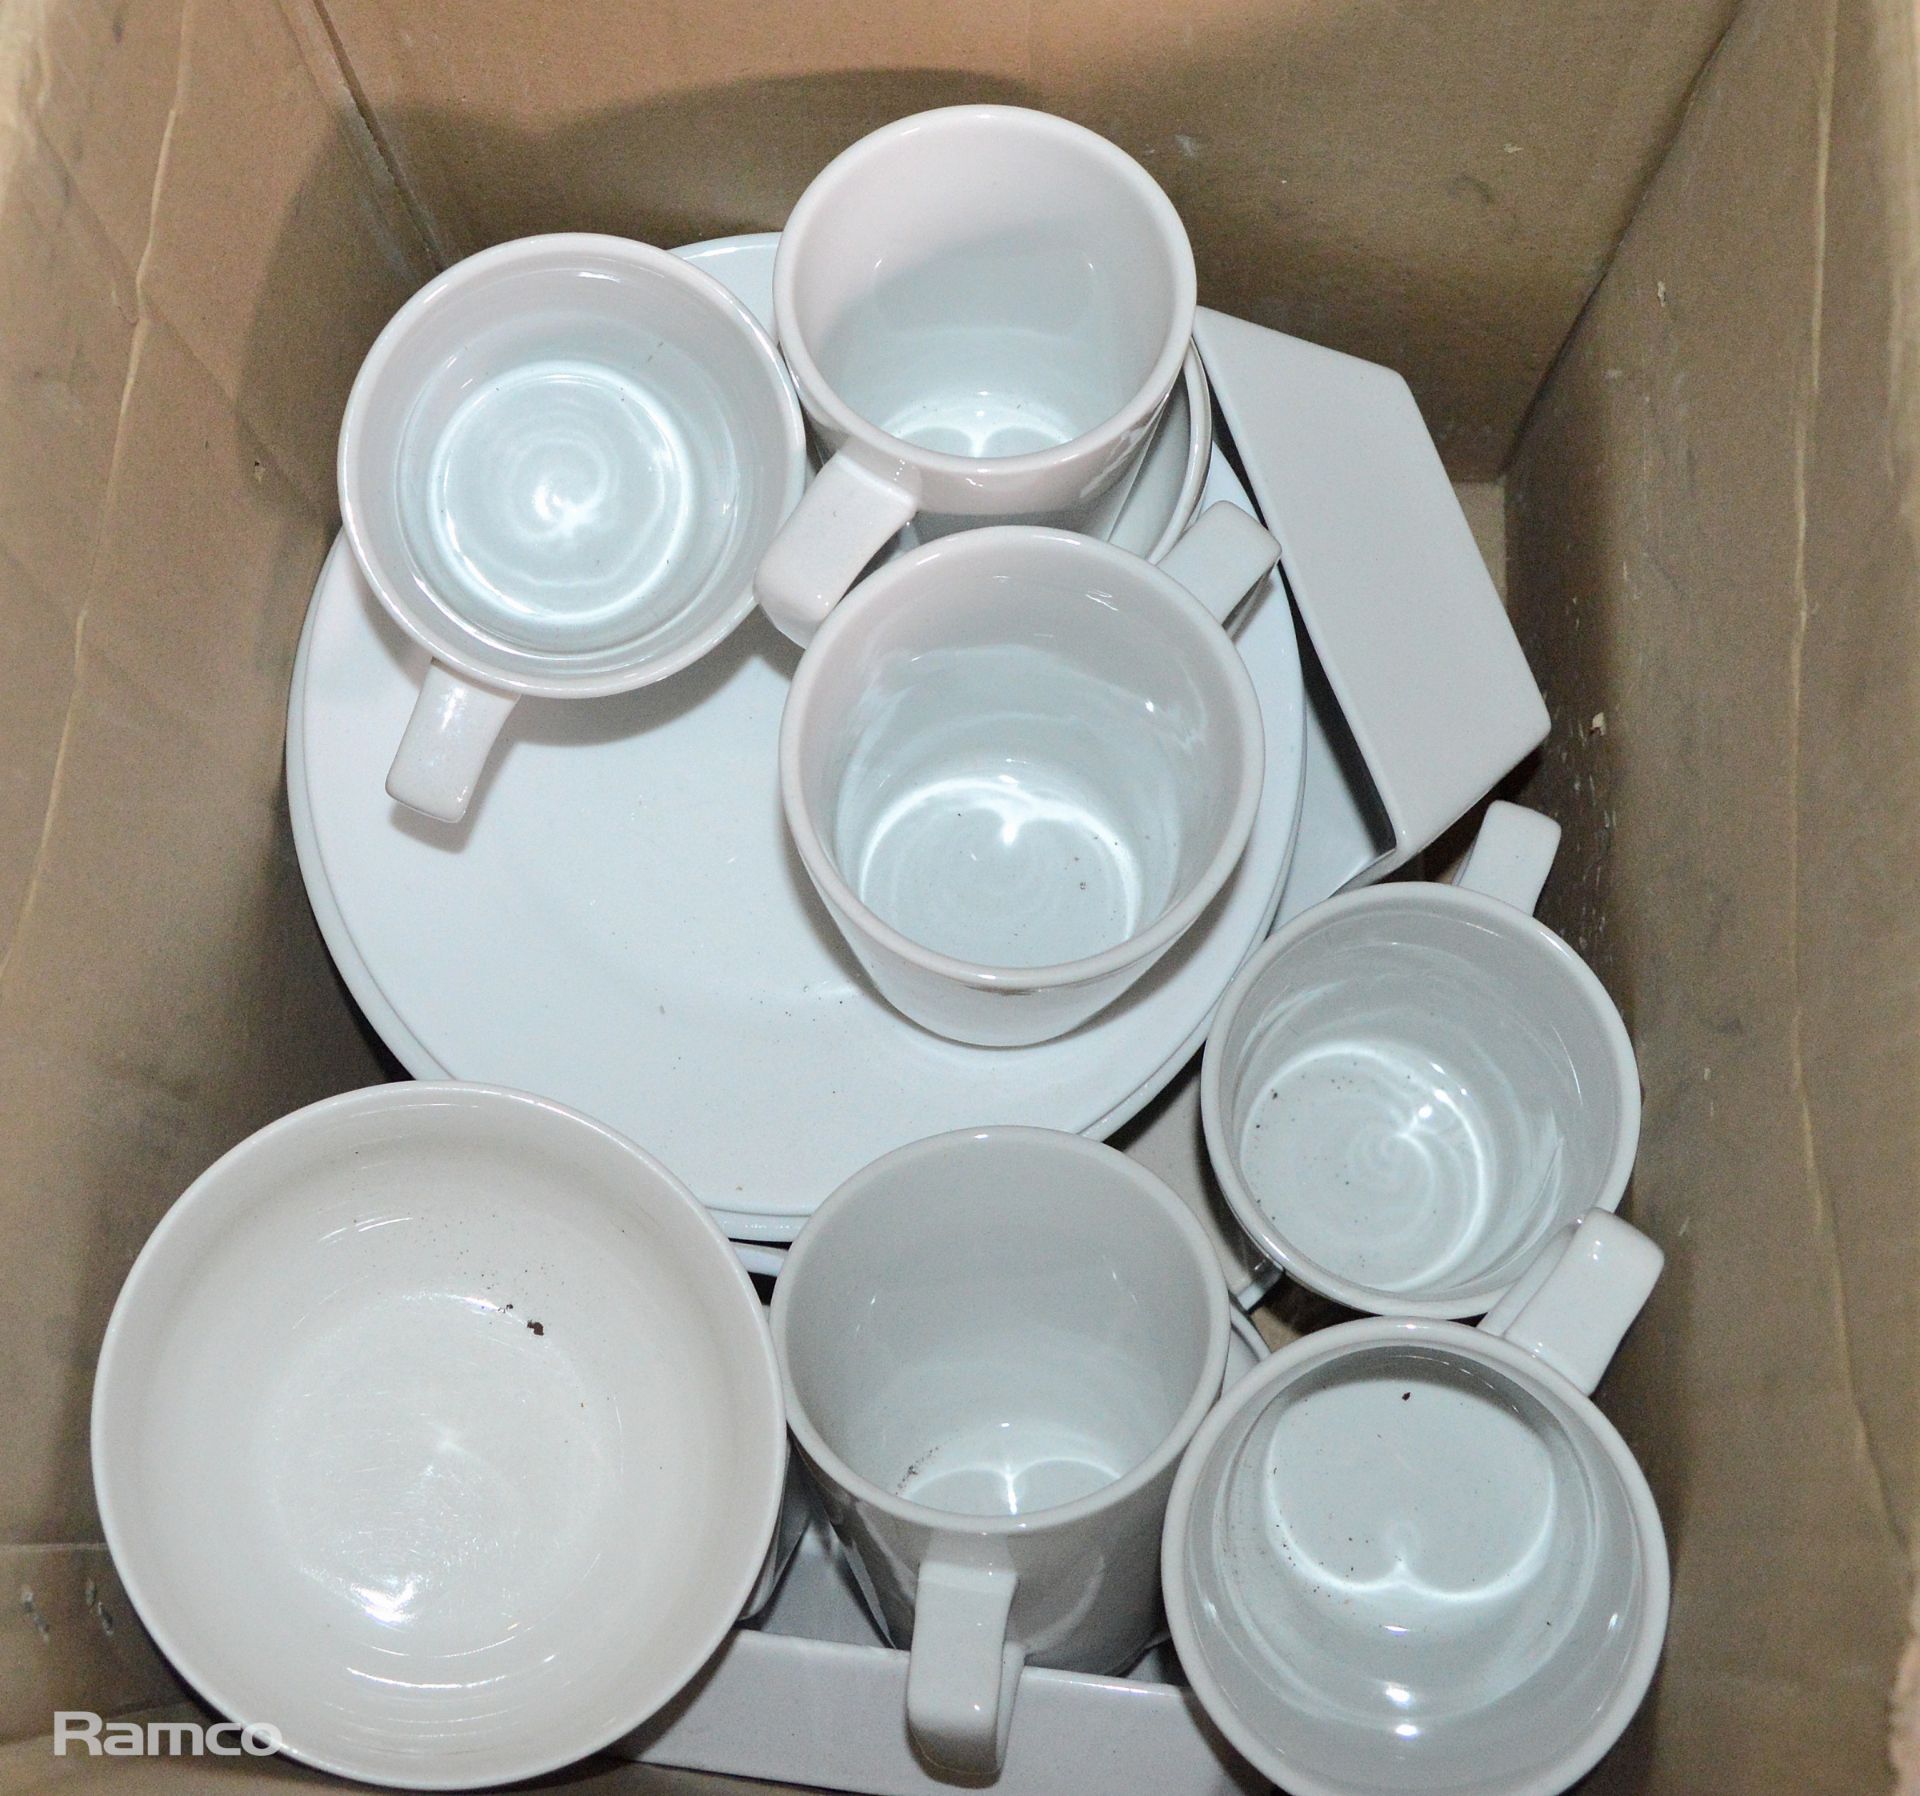 Crockery incl. plates, cups, saucers - Image 4 of 5